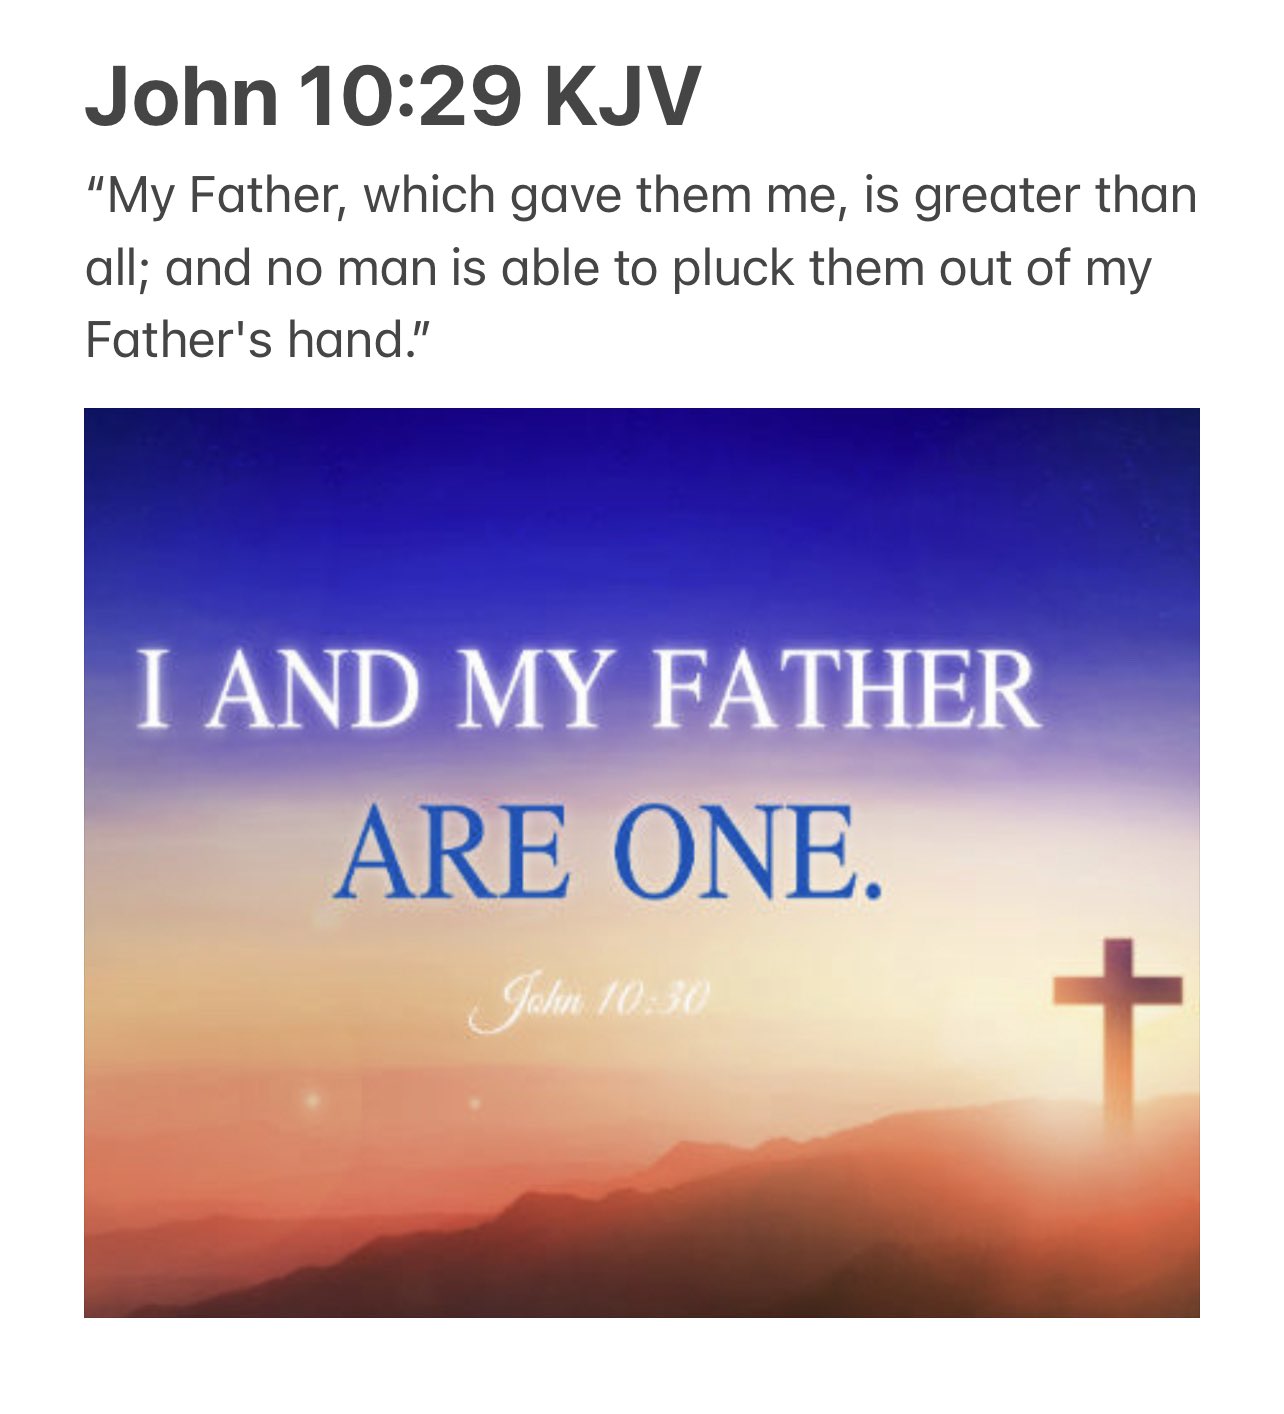 John 10.29 KJV Father; which gave them me; is greater than all; and no man is able to pluck them out of my Father's hand" IAND MY FATHER ARE ONE 3 "My